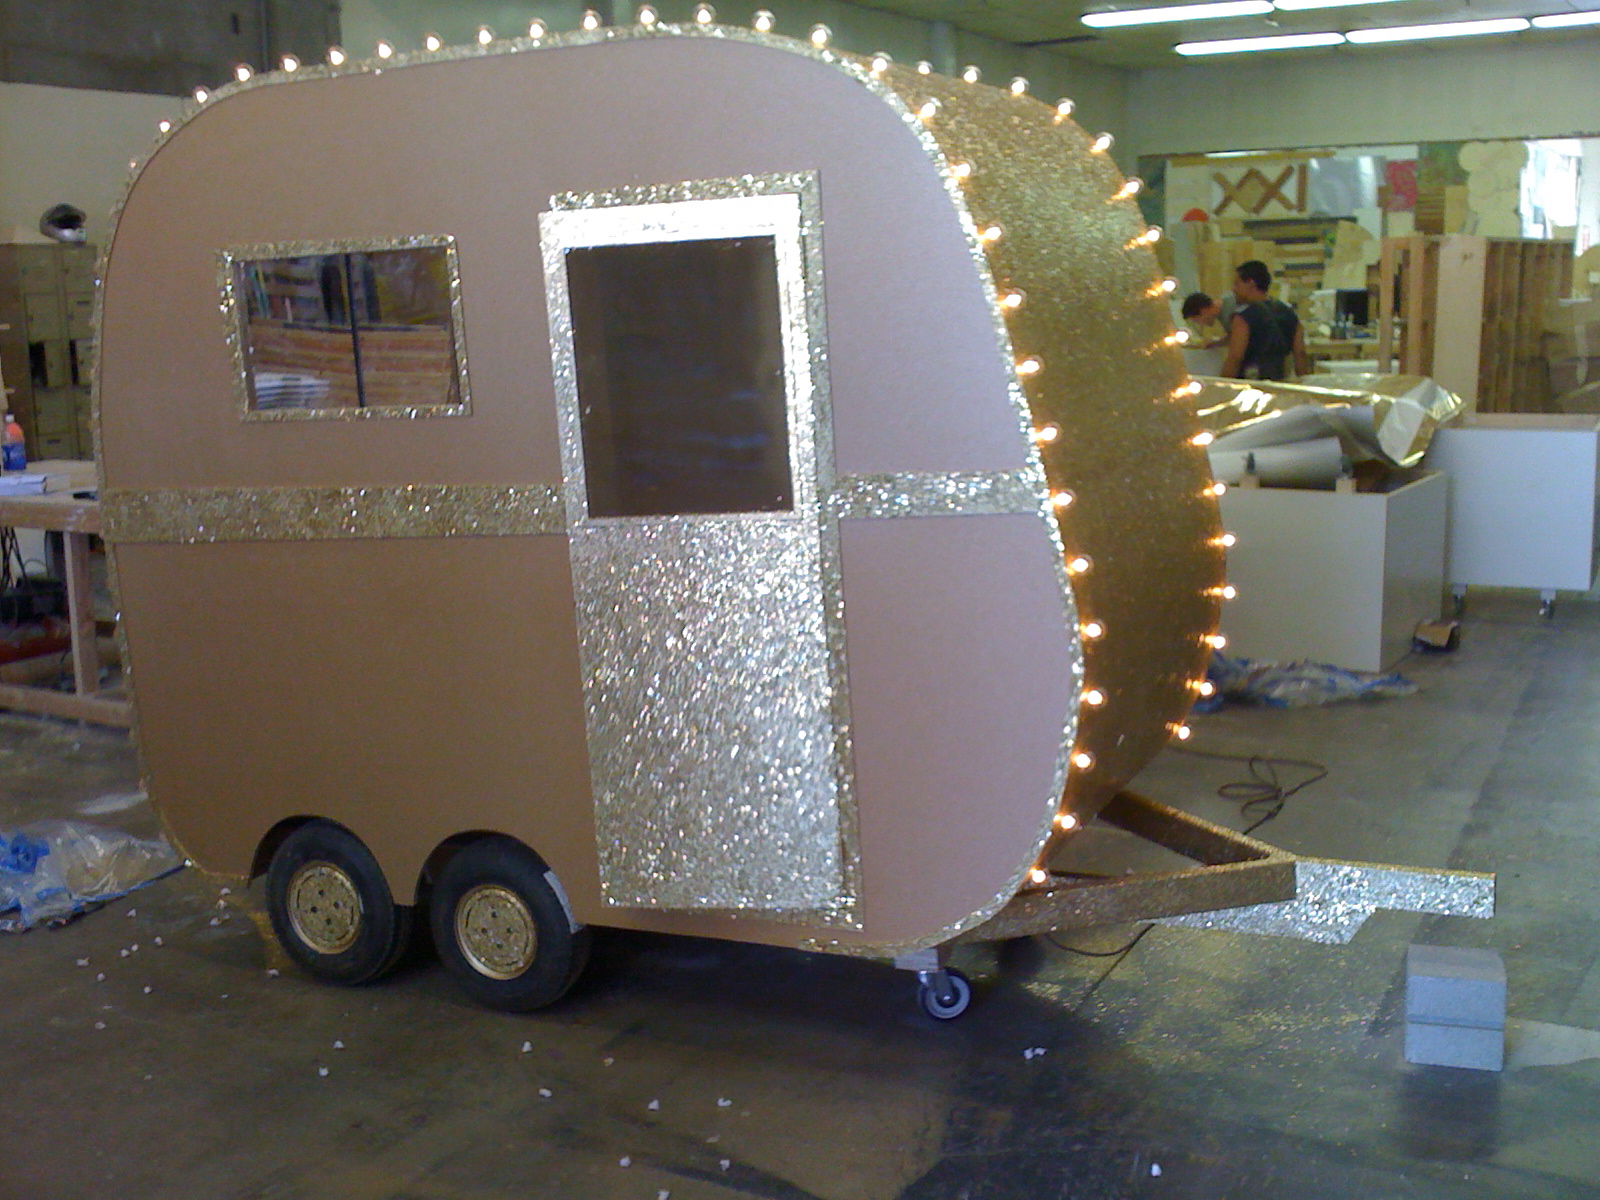 Prop wagon for Las Vegas Forever 21 store opening